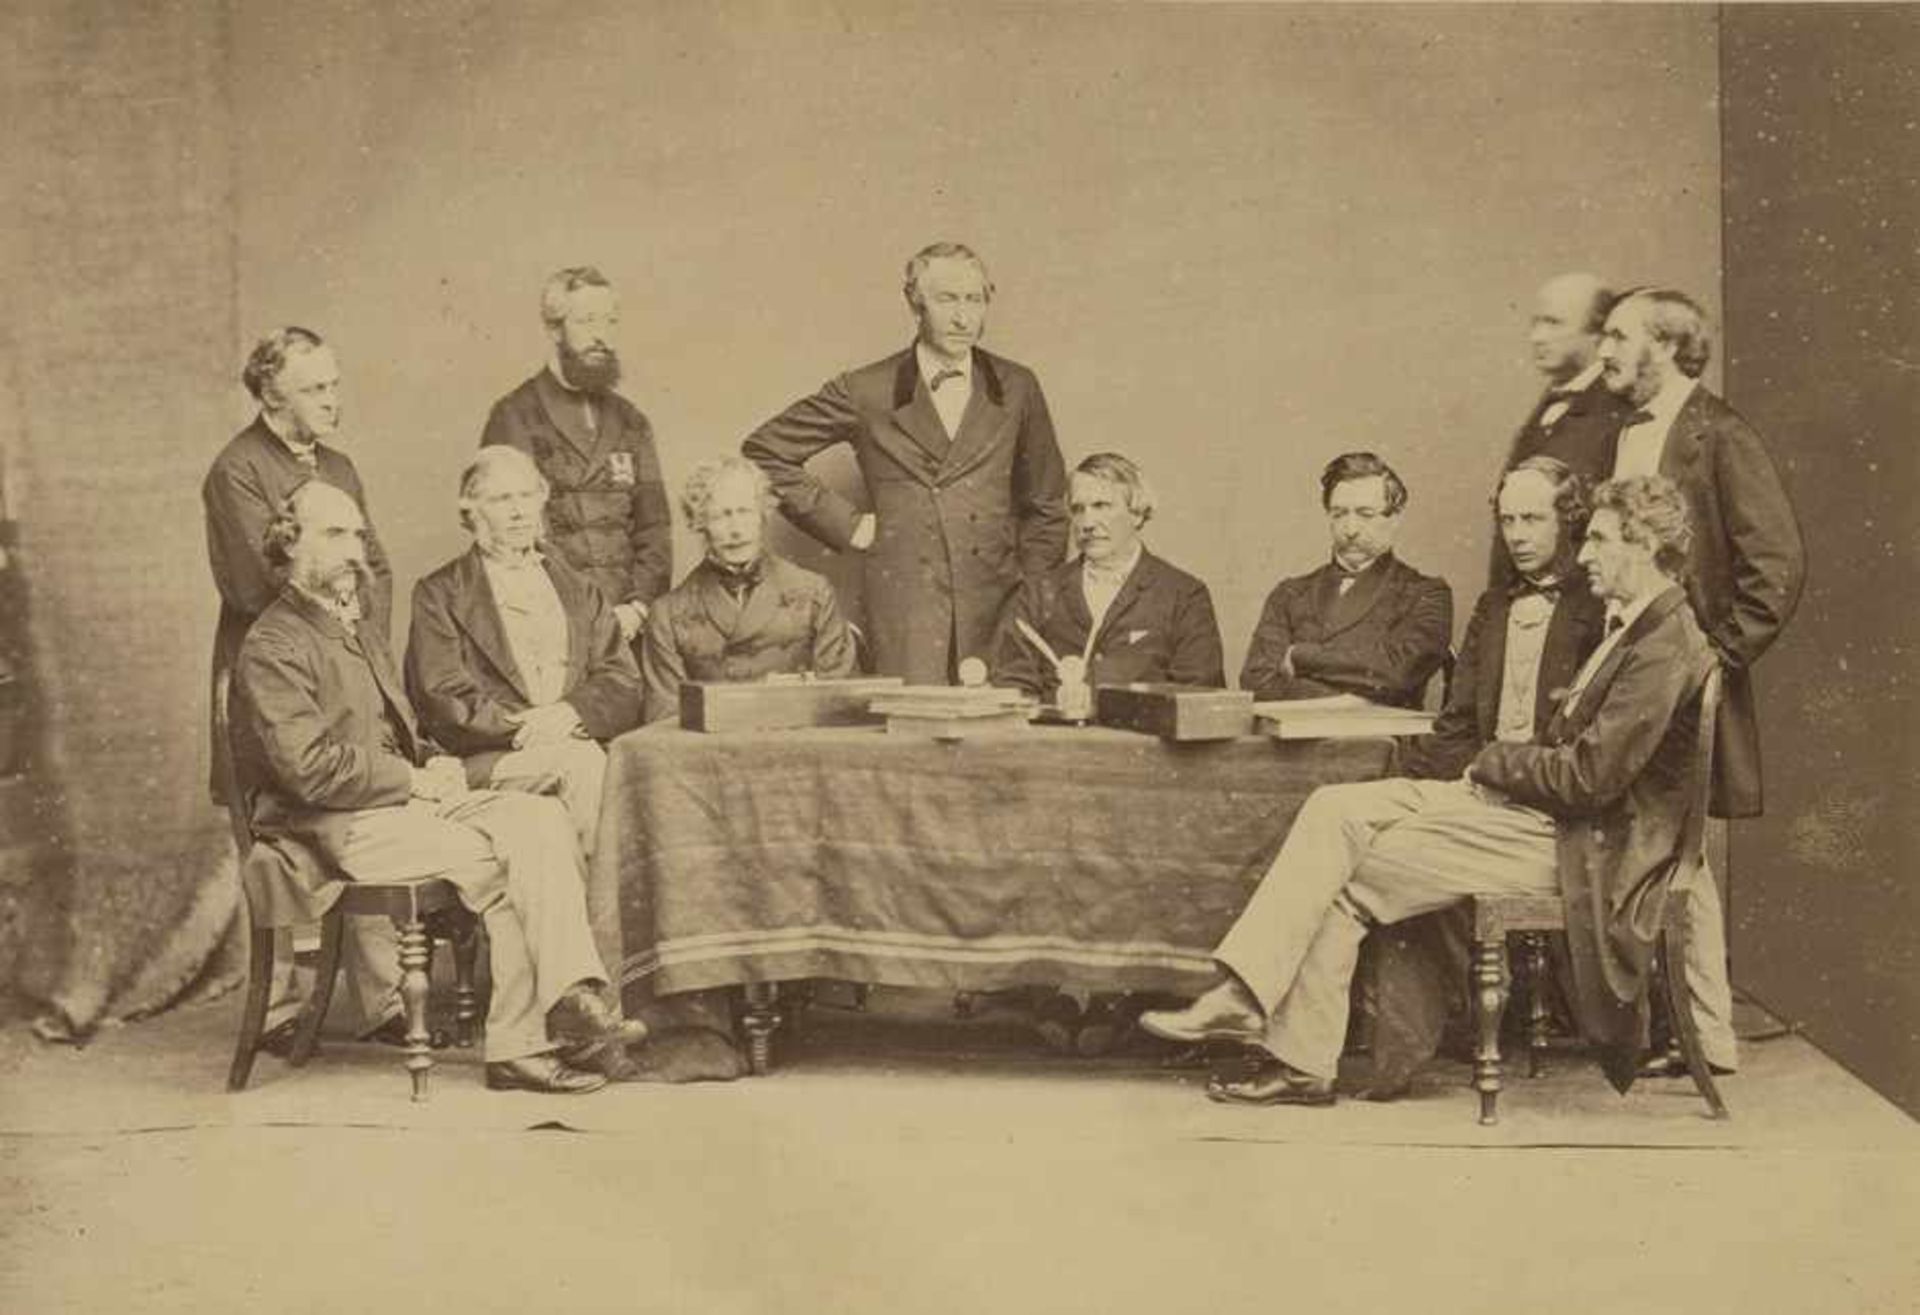 India: Sir John Lawrence, Viceroy of India 1864 - 1869 Photographer: Bourne & Shepherd and others.